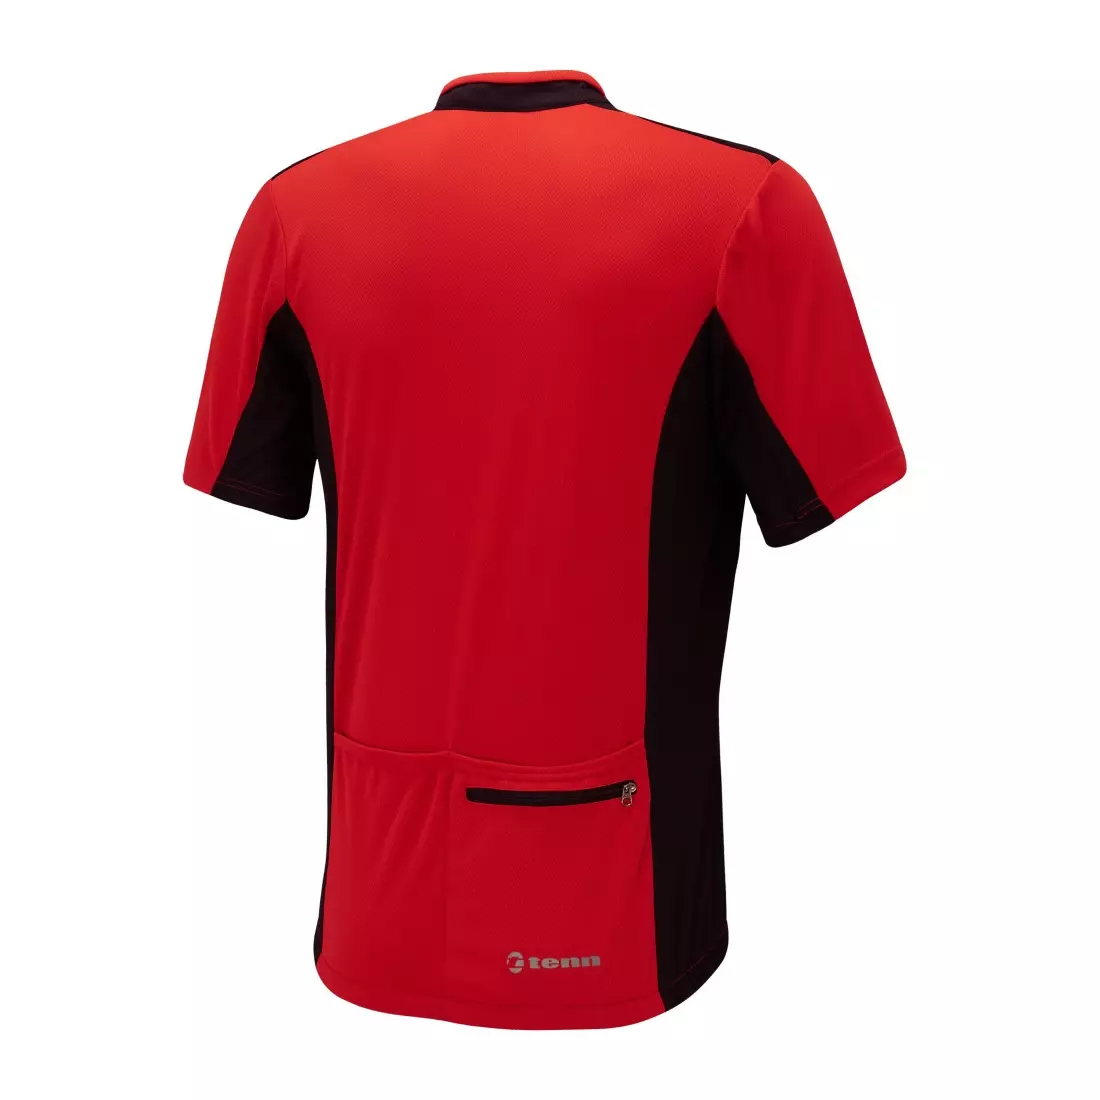 TENN OUTDOORS COOLFLO men's cycling jersey red and black